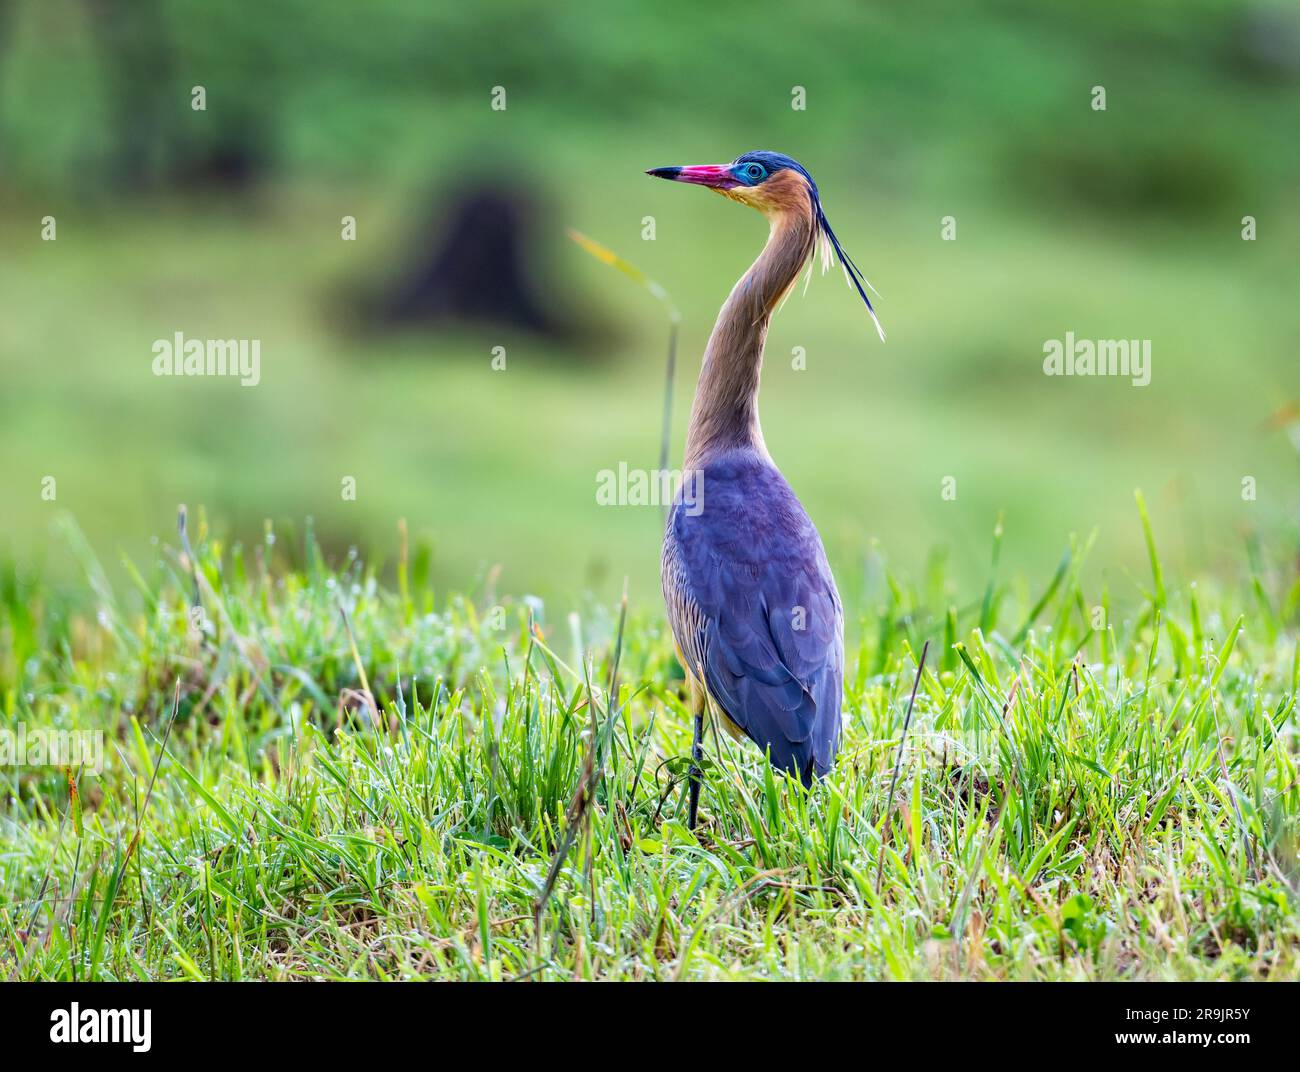 A colorful Whistling Heron (Syrigma sibilatrix) walking in green grass. Colombia, South America. Stock Photo